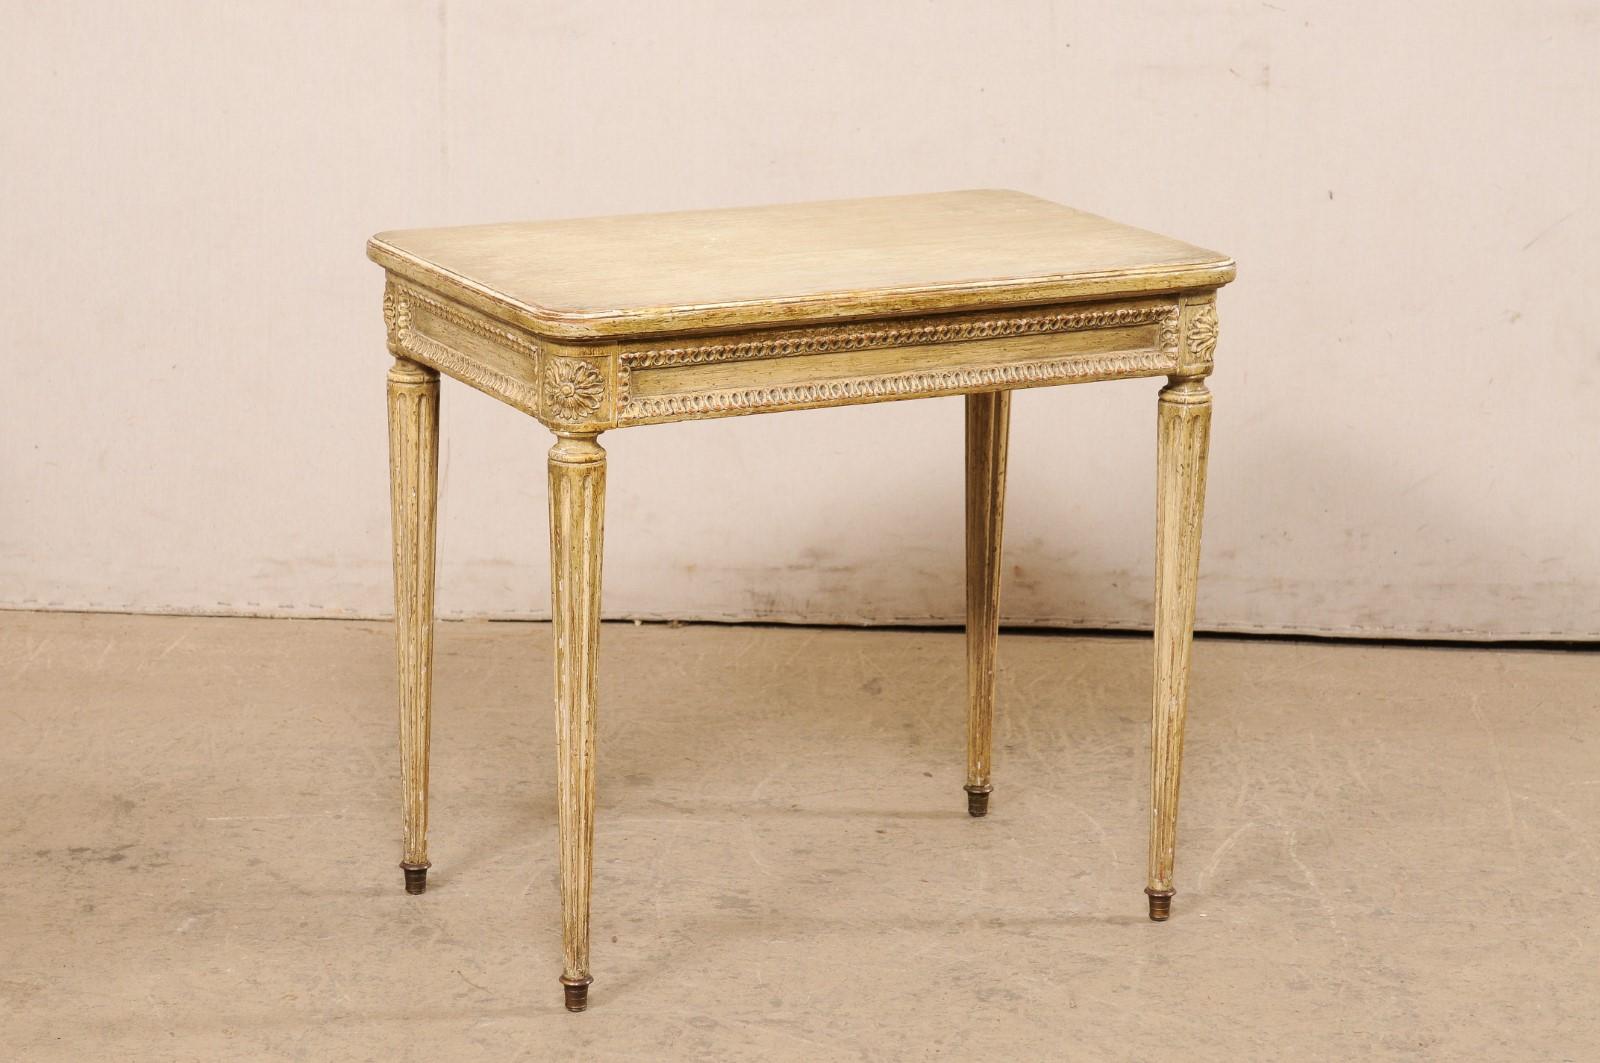 A French Louis XVI style side table with drawer, from the early 20th century. This antique rectangular-shaped table from France has been created in the Louis XVI style. The top has smoothly rounded corners and slightly overhangs the apron below